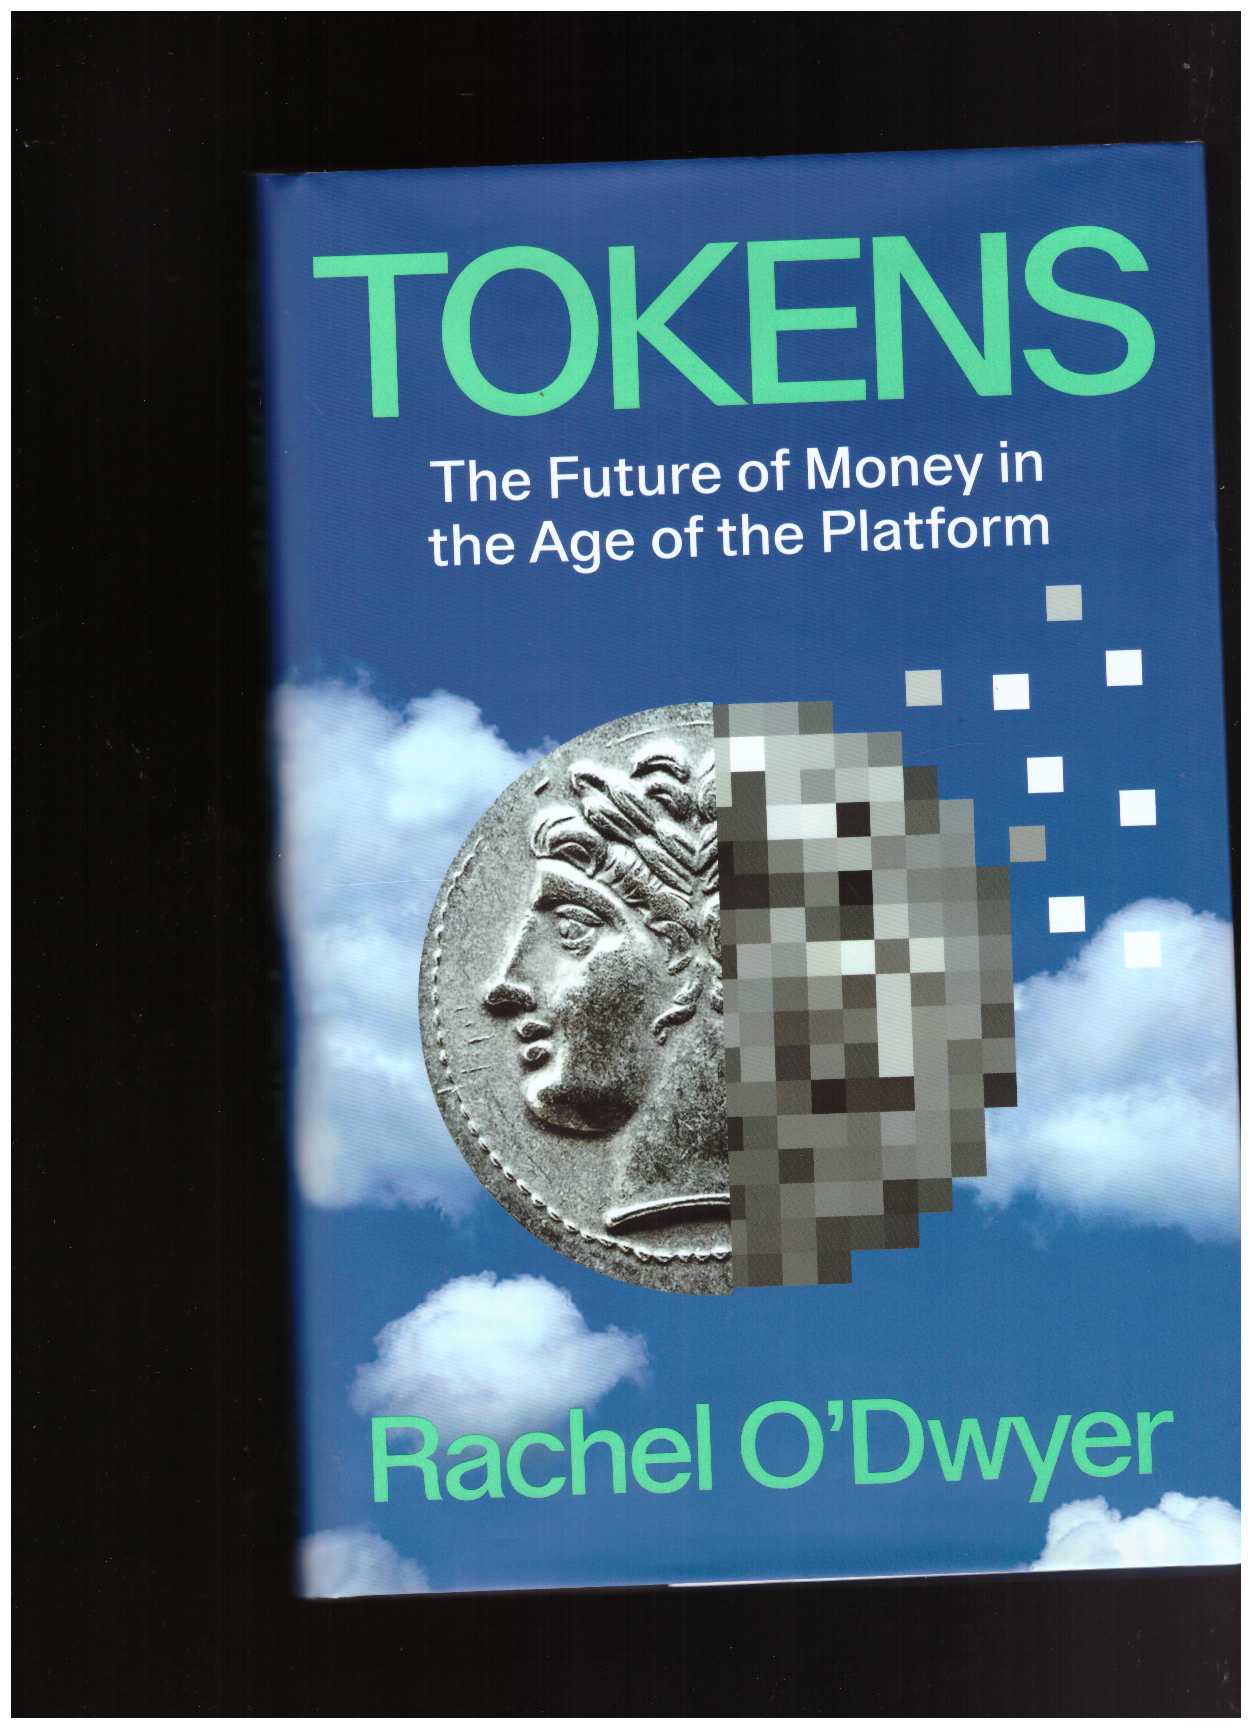 O'DWYER, Rachel - Tokens: The Future of Money in the Age of the Platform